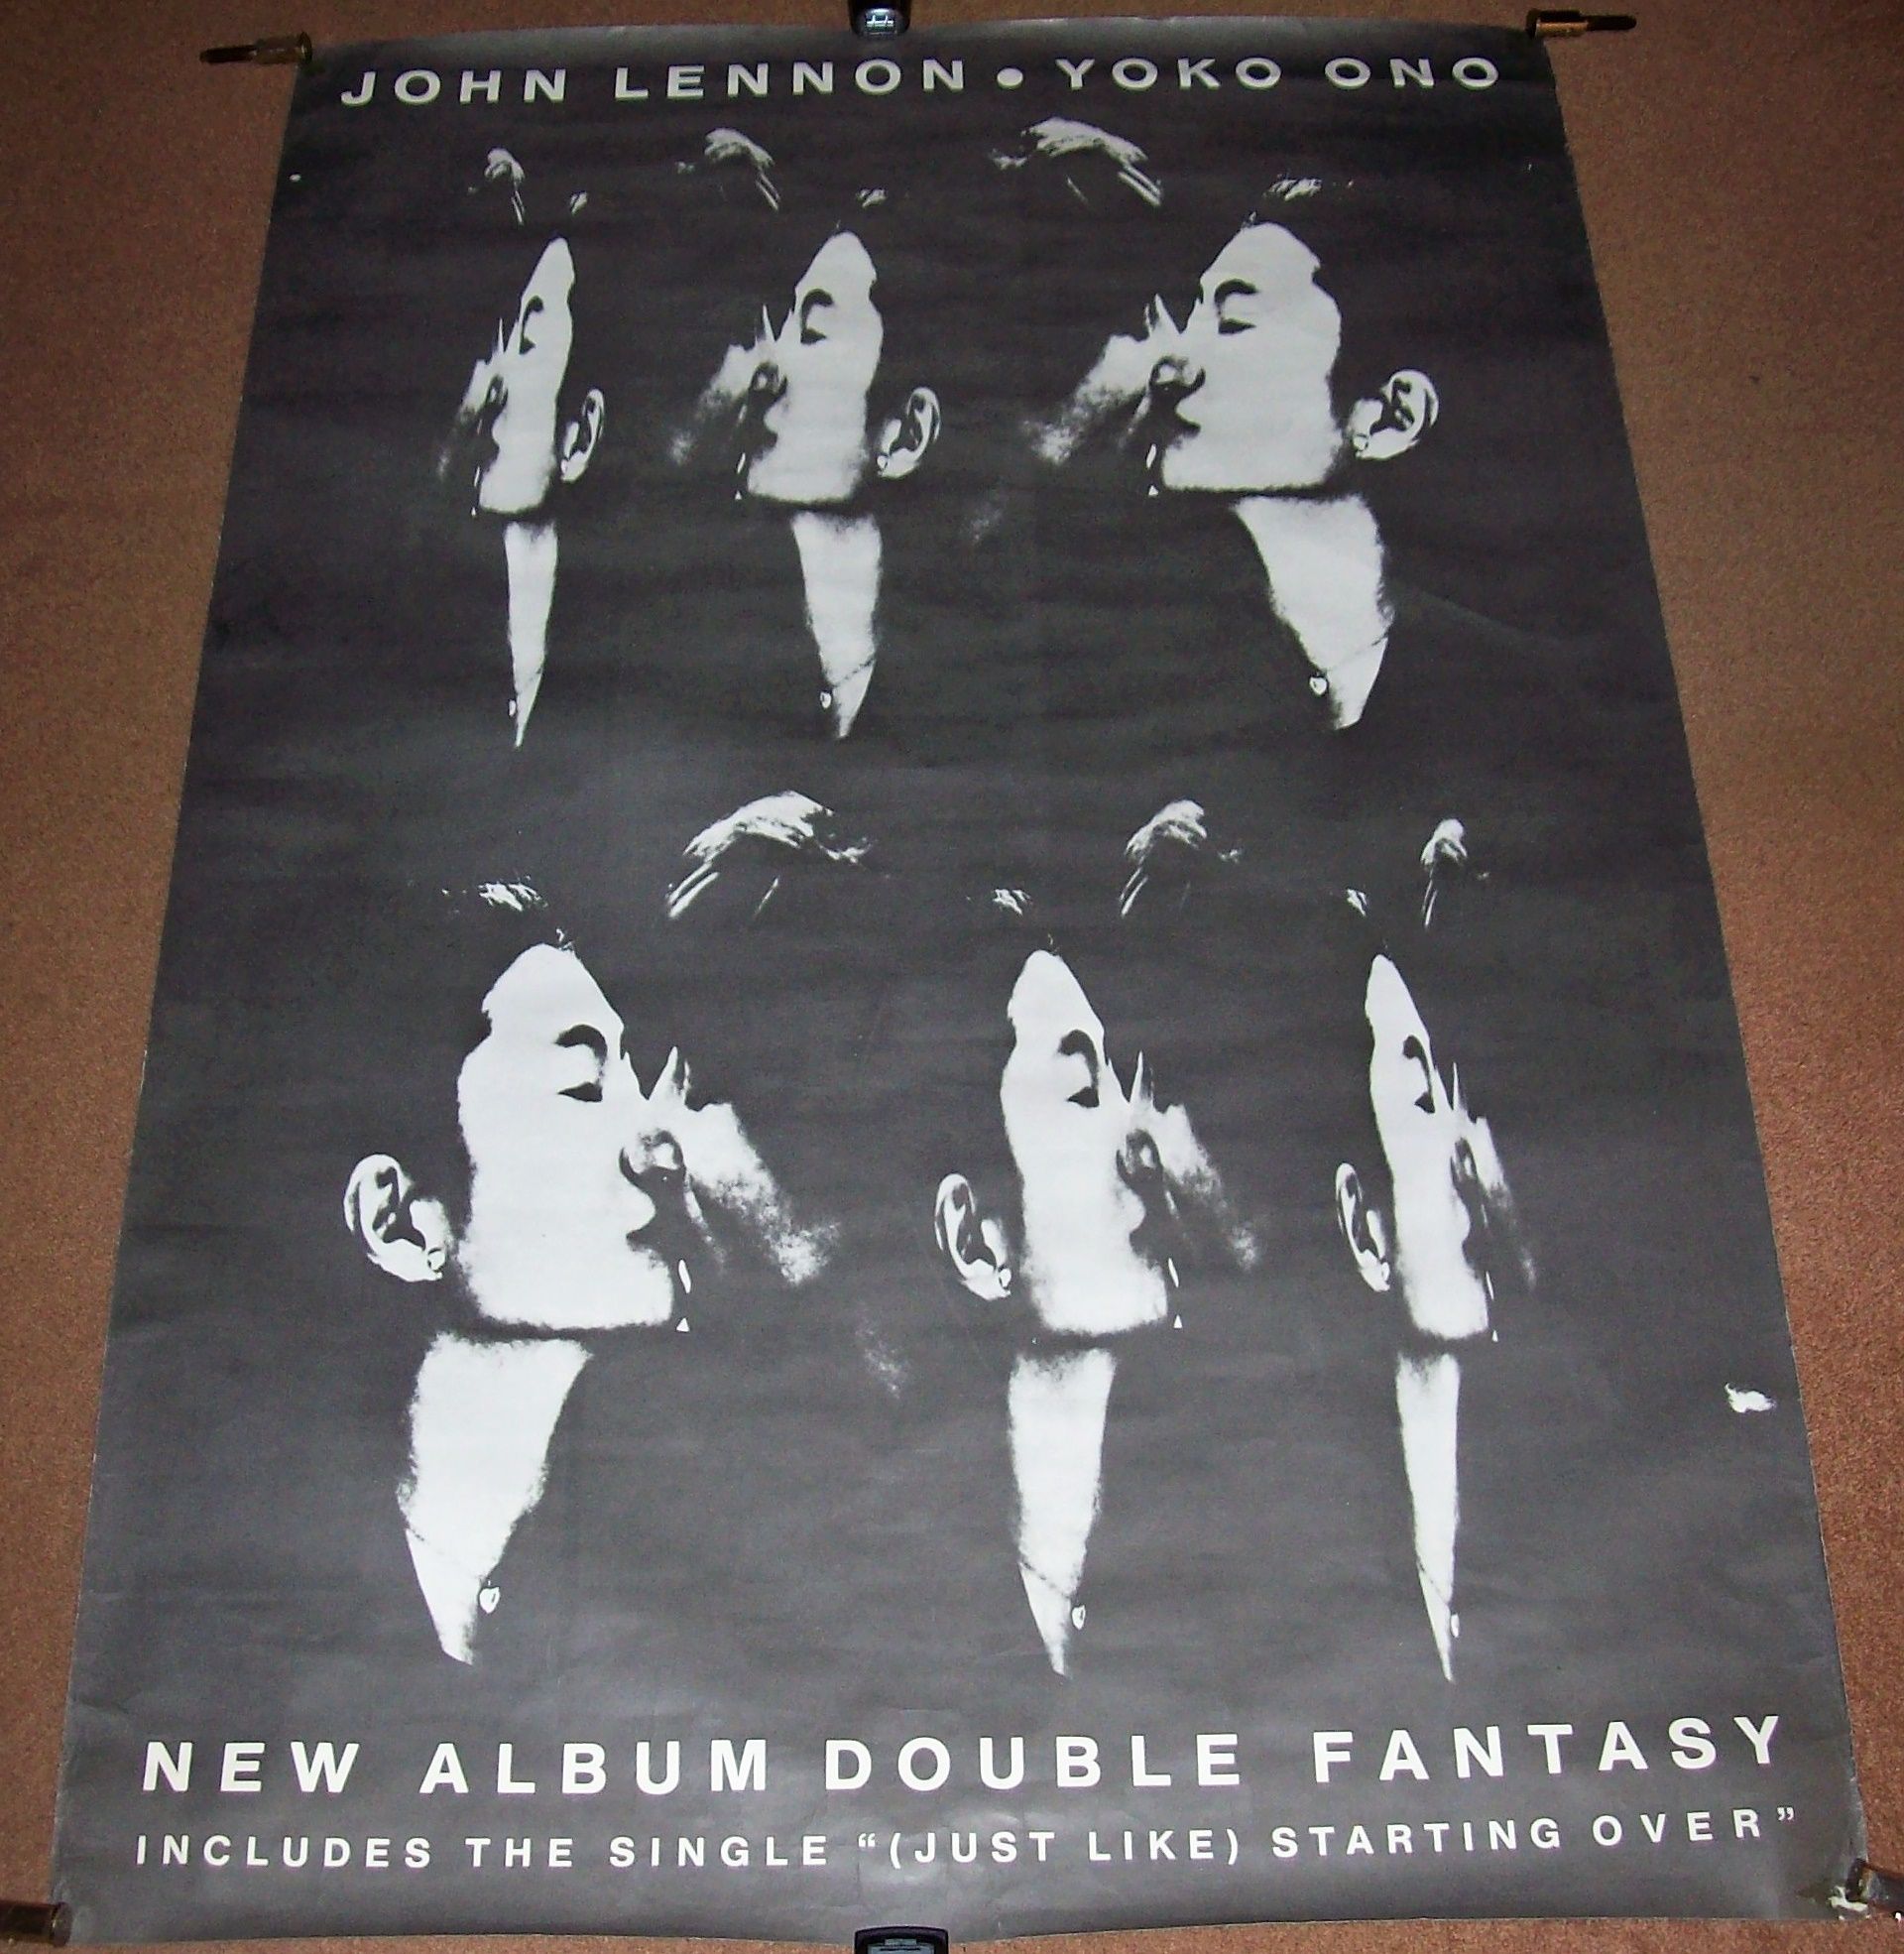 THE BEATLES JOHN LENNON U.K. RECORD COMPANY PROMO POSTER FOR THE RELEASE OF